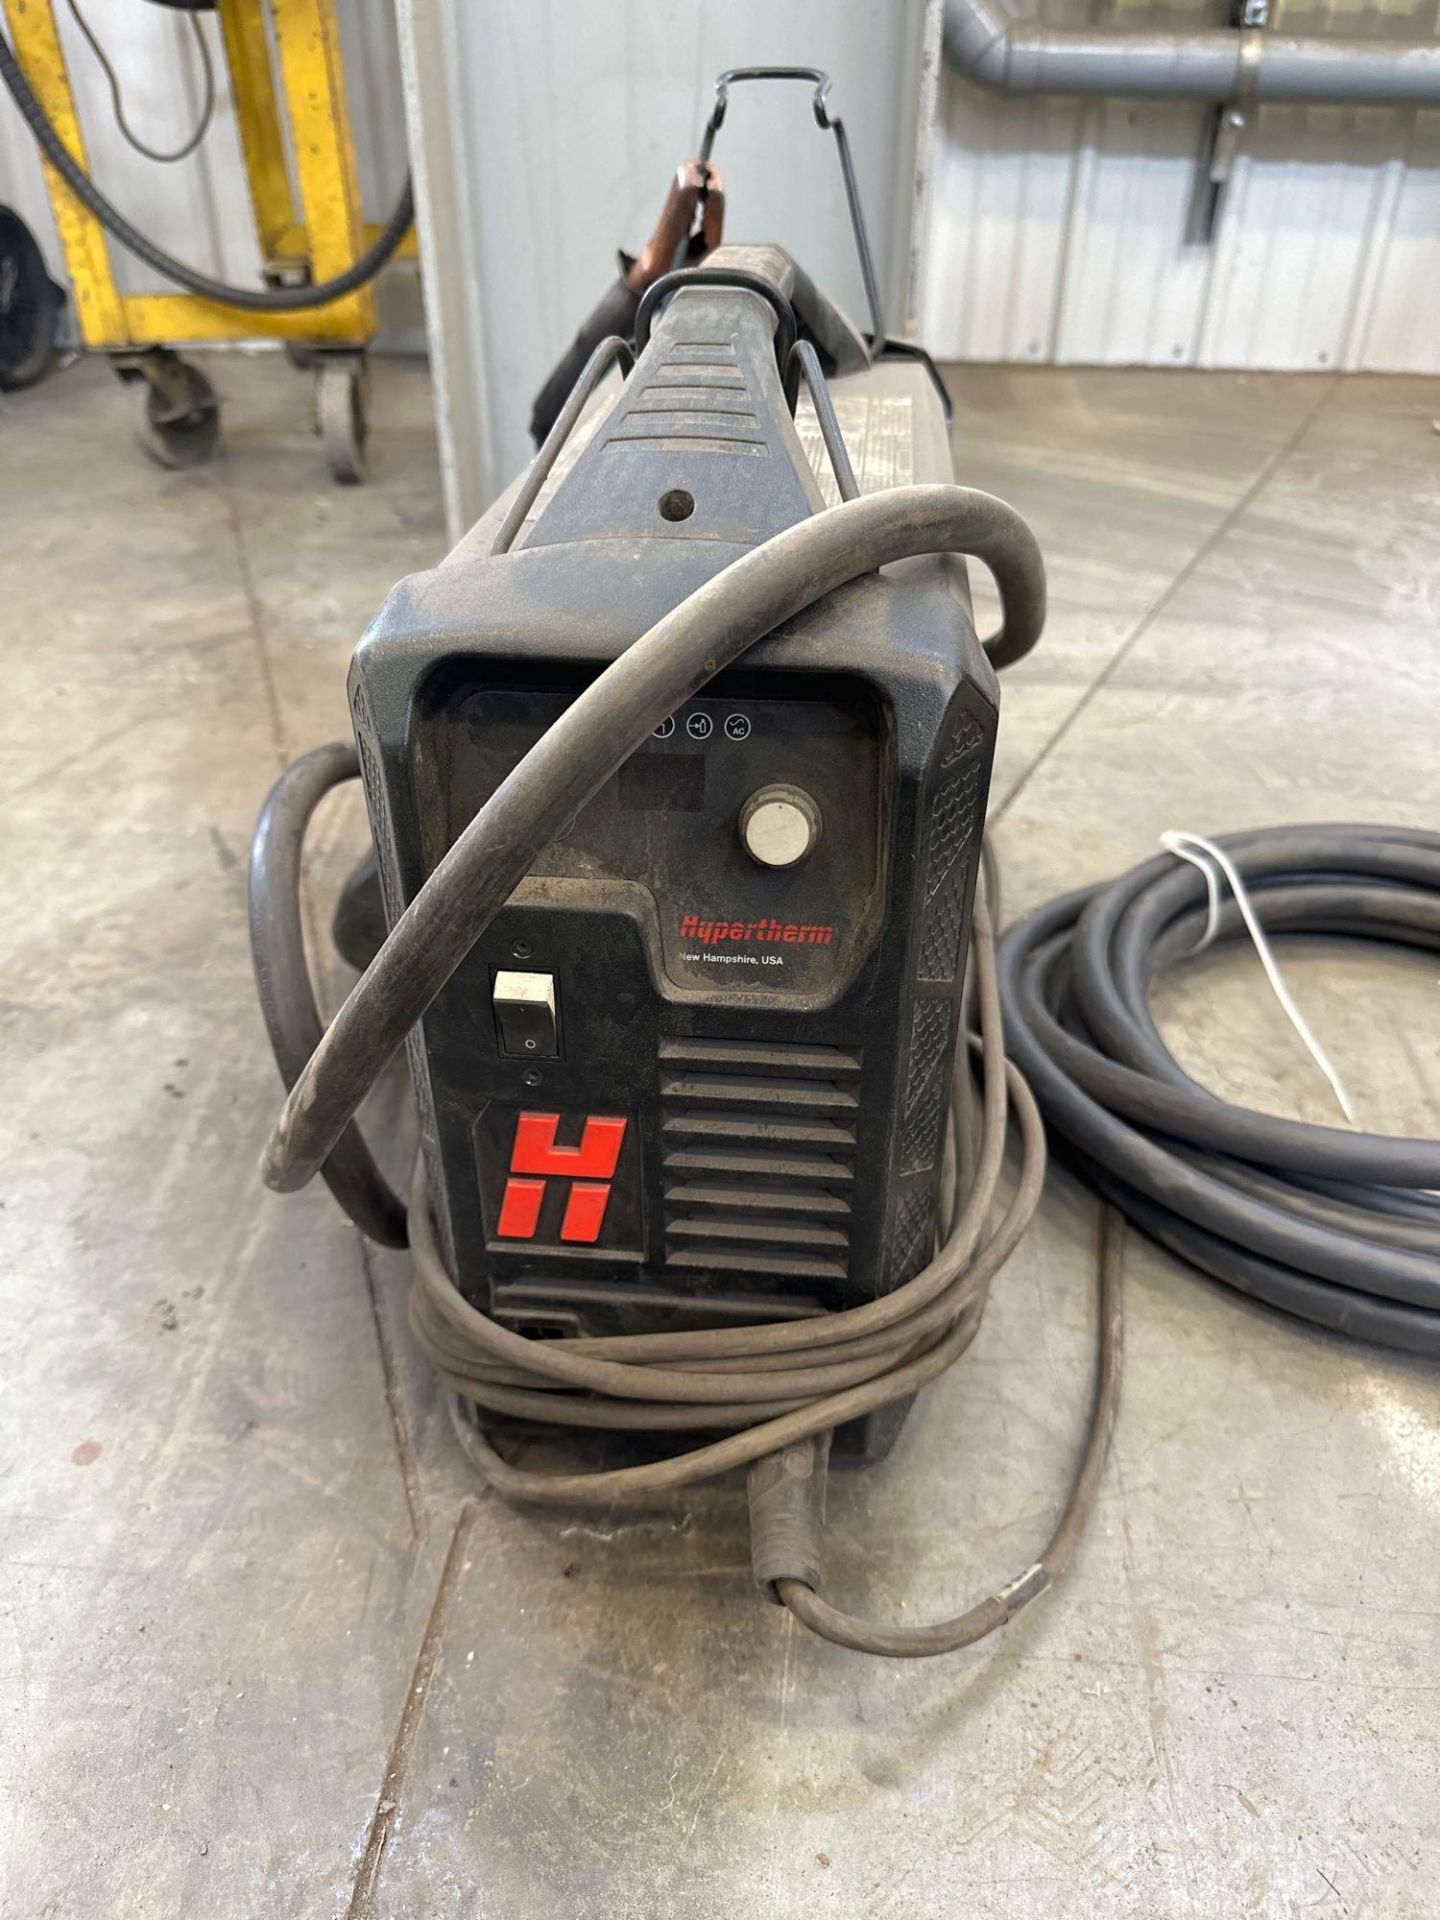 Hypertherm Powermax 45 Plasma Cutter w. extra cable - Image 4 of 7